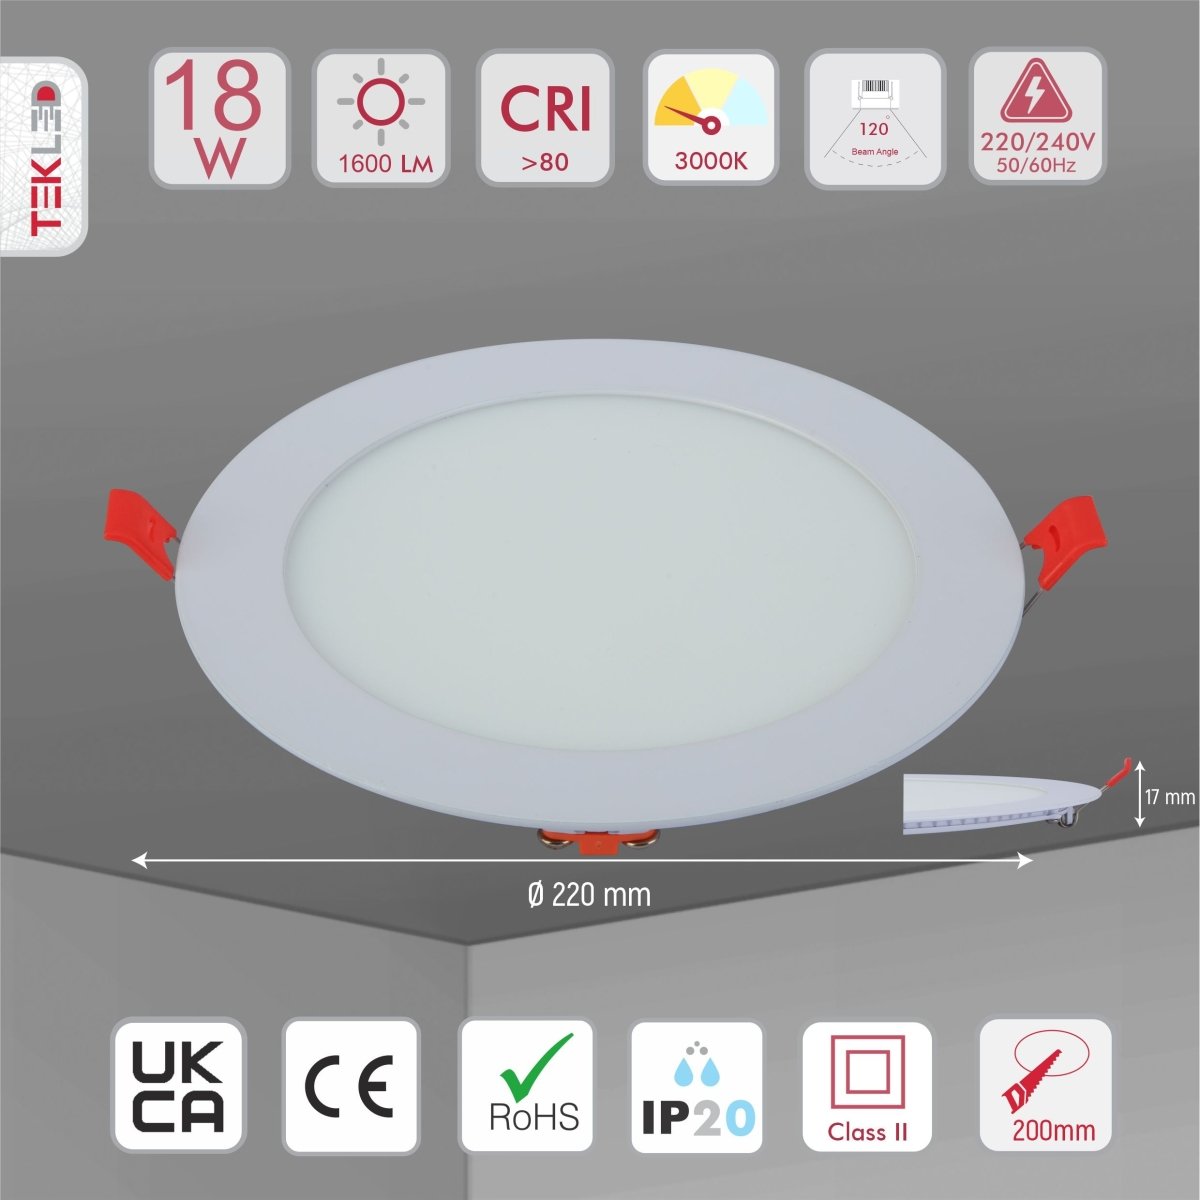 Product dimensions of downlight led round slim panel light 18w 3000k warm white d220mm